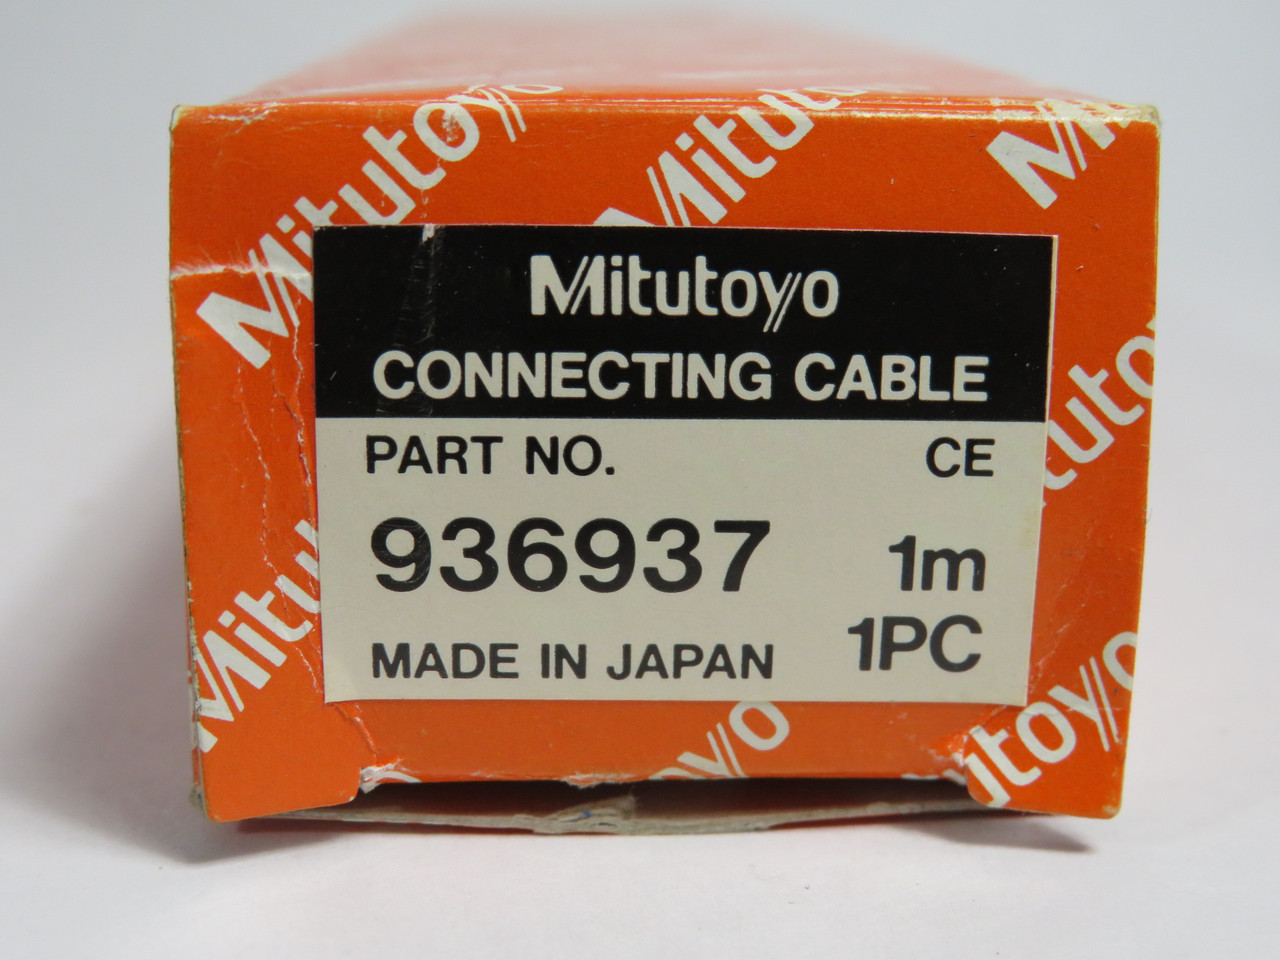 Mitutoyo 936937 RS Link SPC Connecting Cable 1m NEW